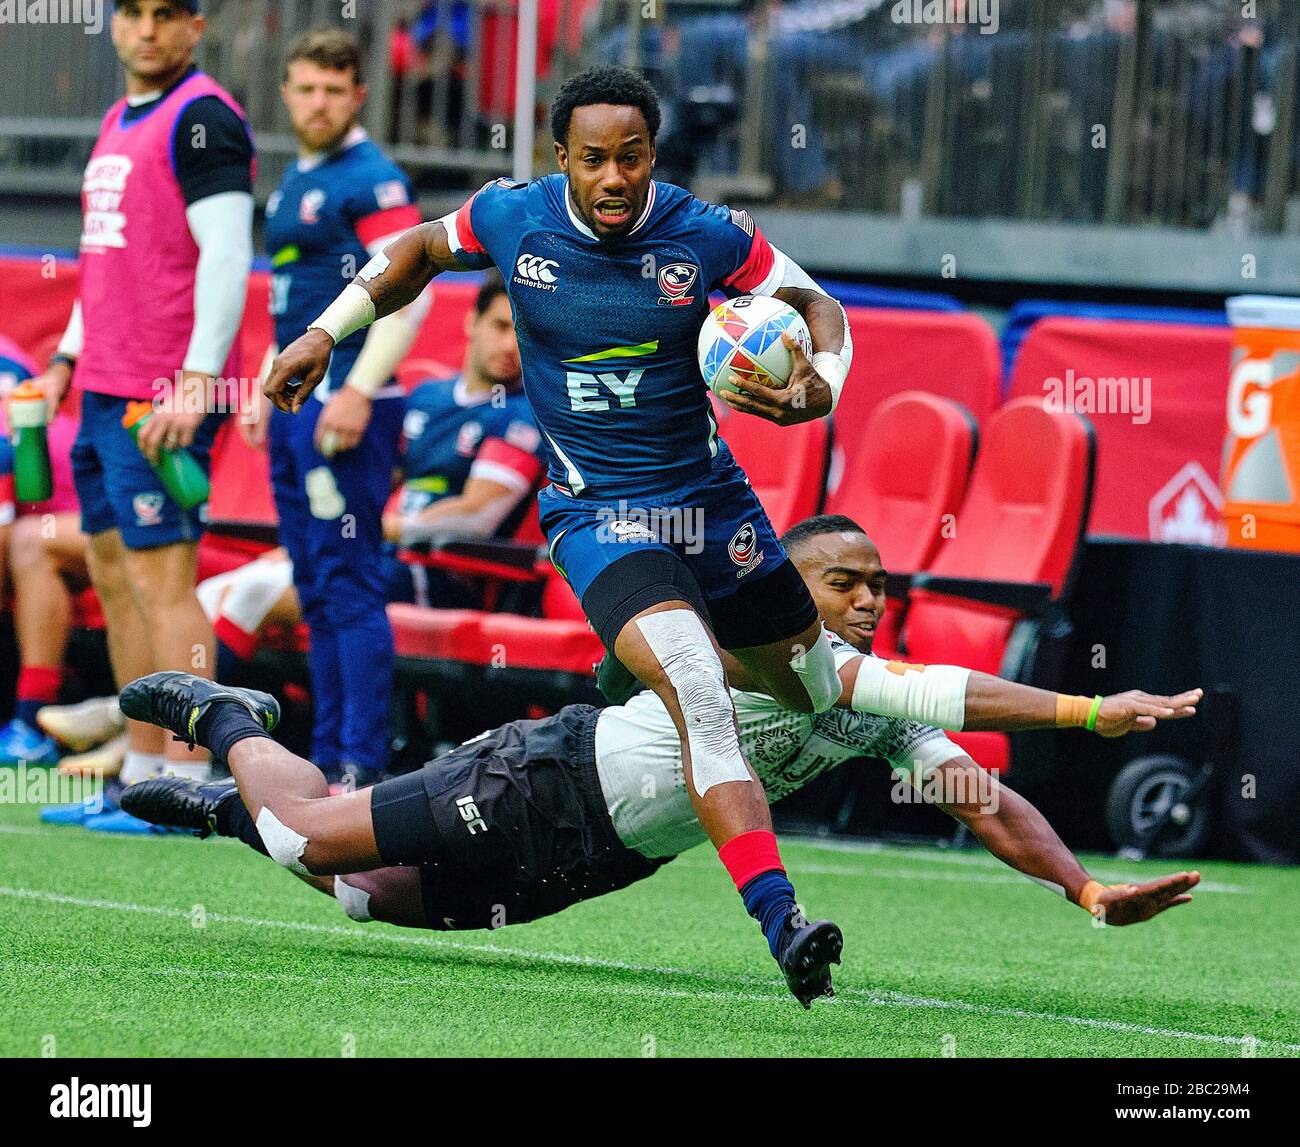 Vancouver, Canada. 8th March, 2020. Carlin Isles #1 of USA gets by Fiji tackler in Match #37 (5th Place Semi Final) during Day 2 - 2020 HSBC World Rug Stock Photo